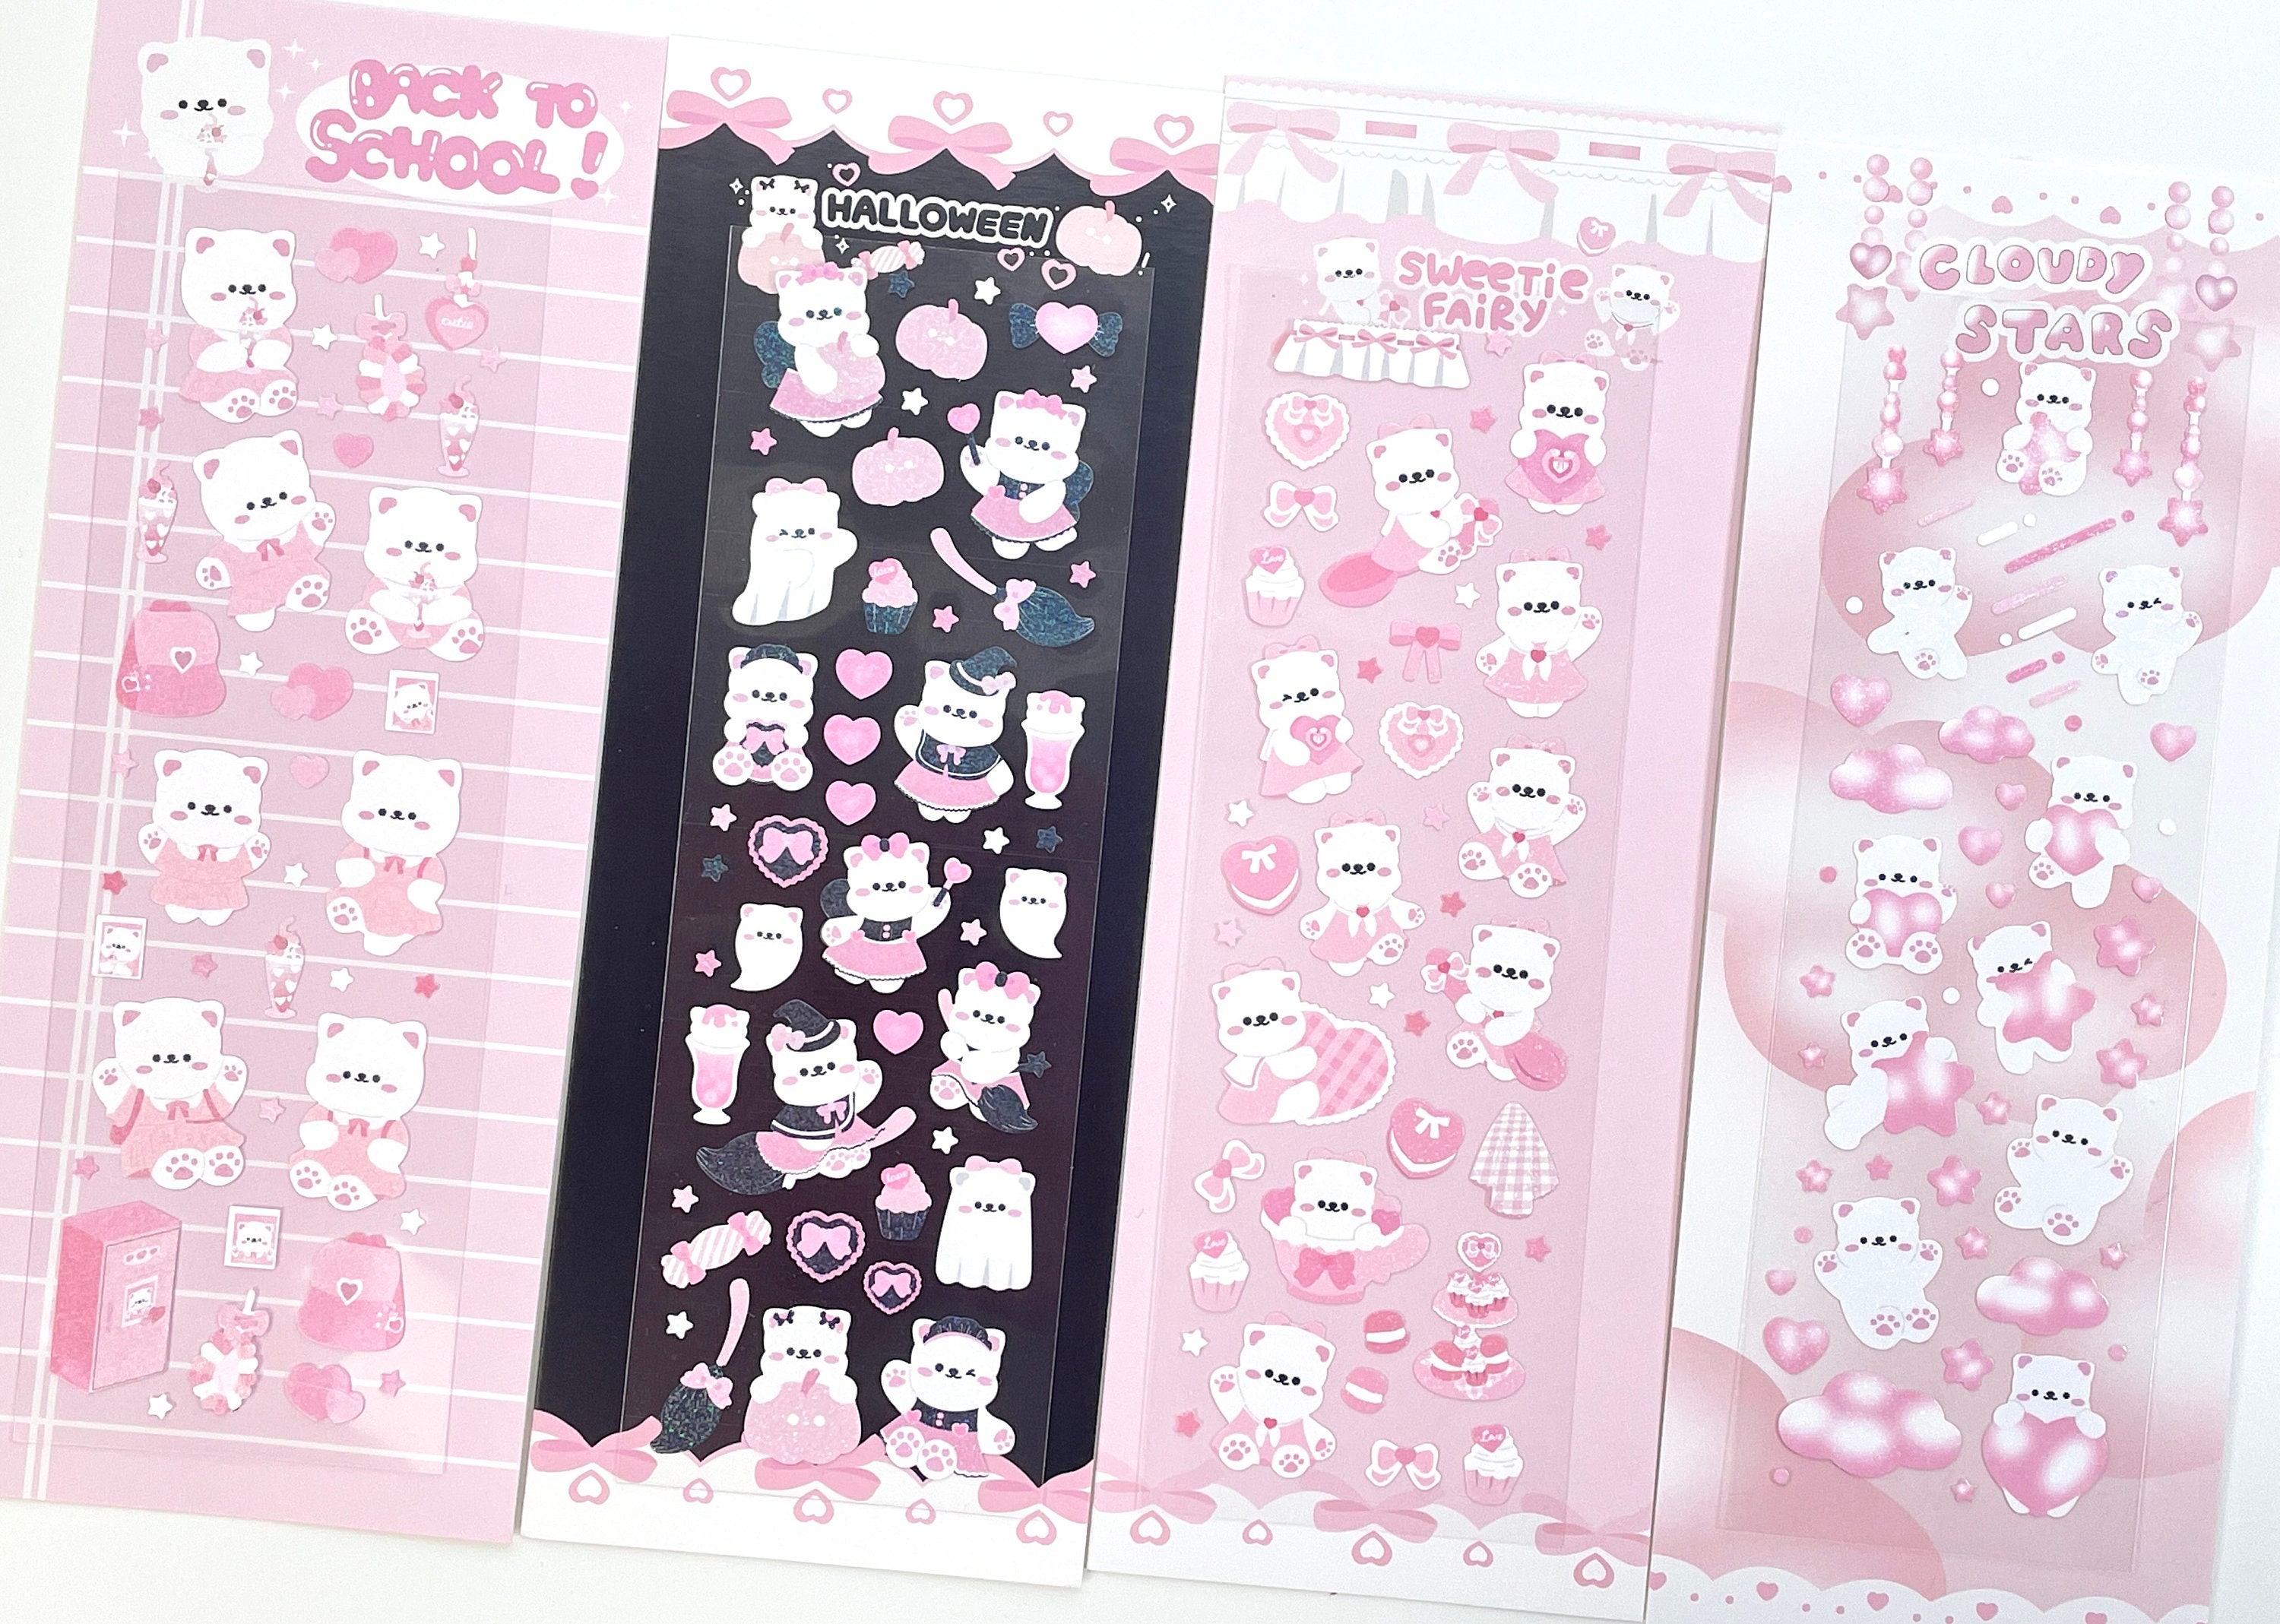 Pastel Color String of Pearl Ribbon Sticker, Kpop Photocards